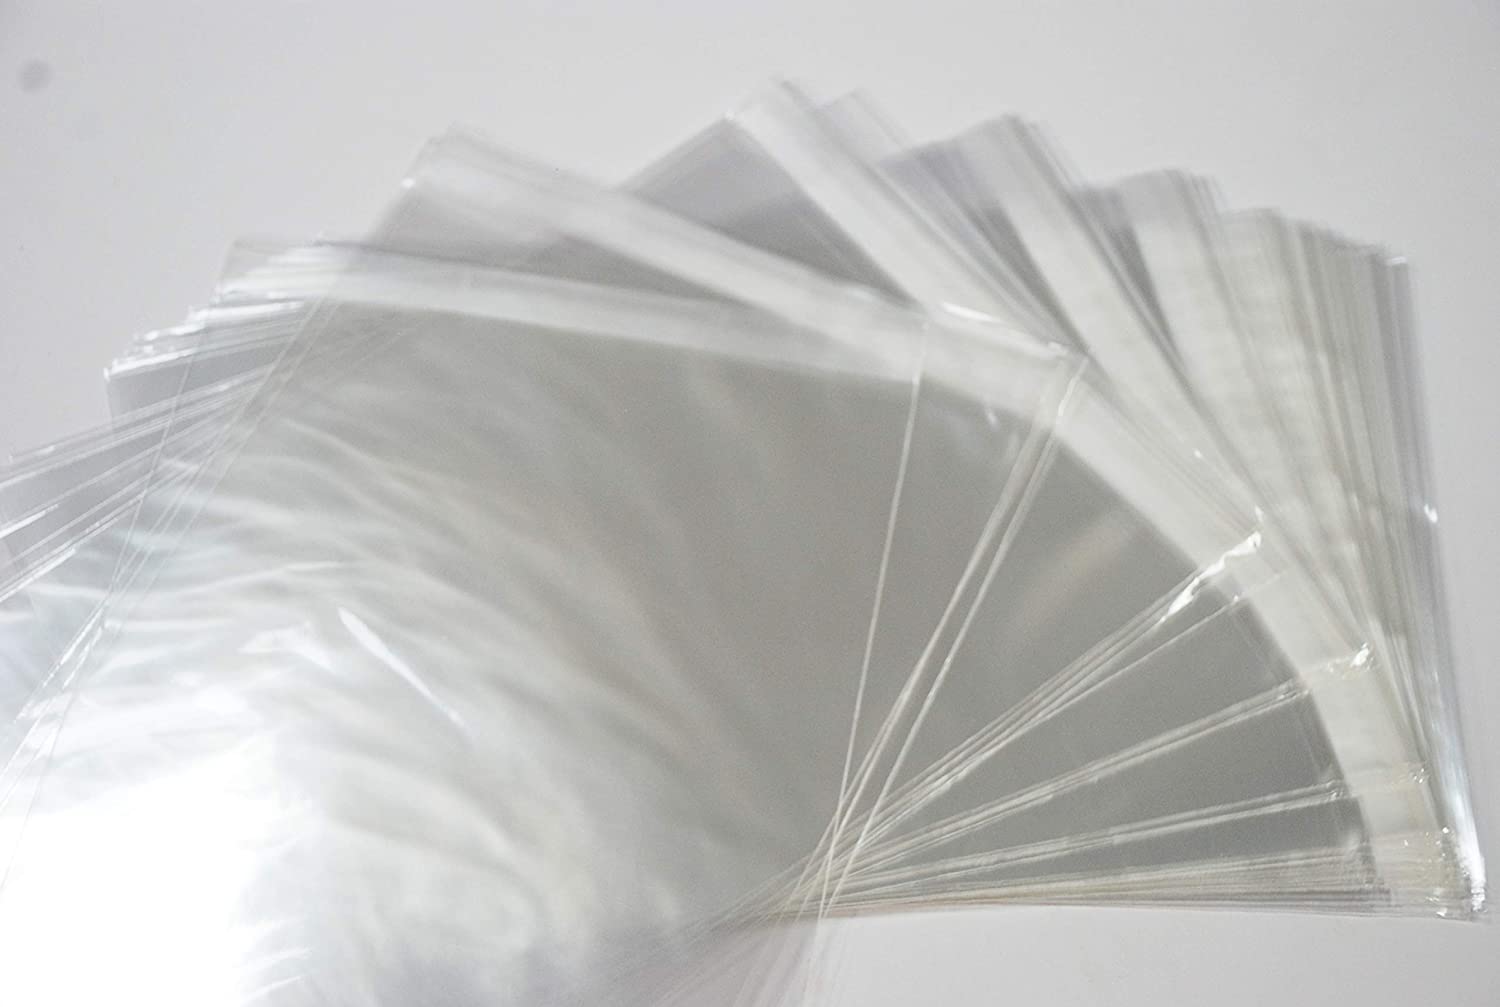 Biodegradeable 160mm X 155mm 6 X 6 Cello Bags - Etsy UK